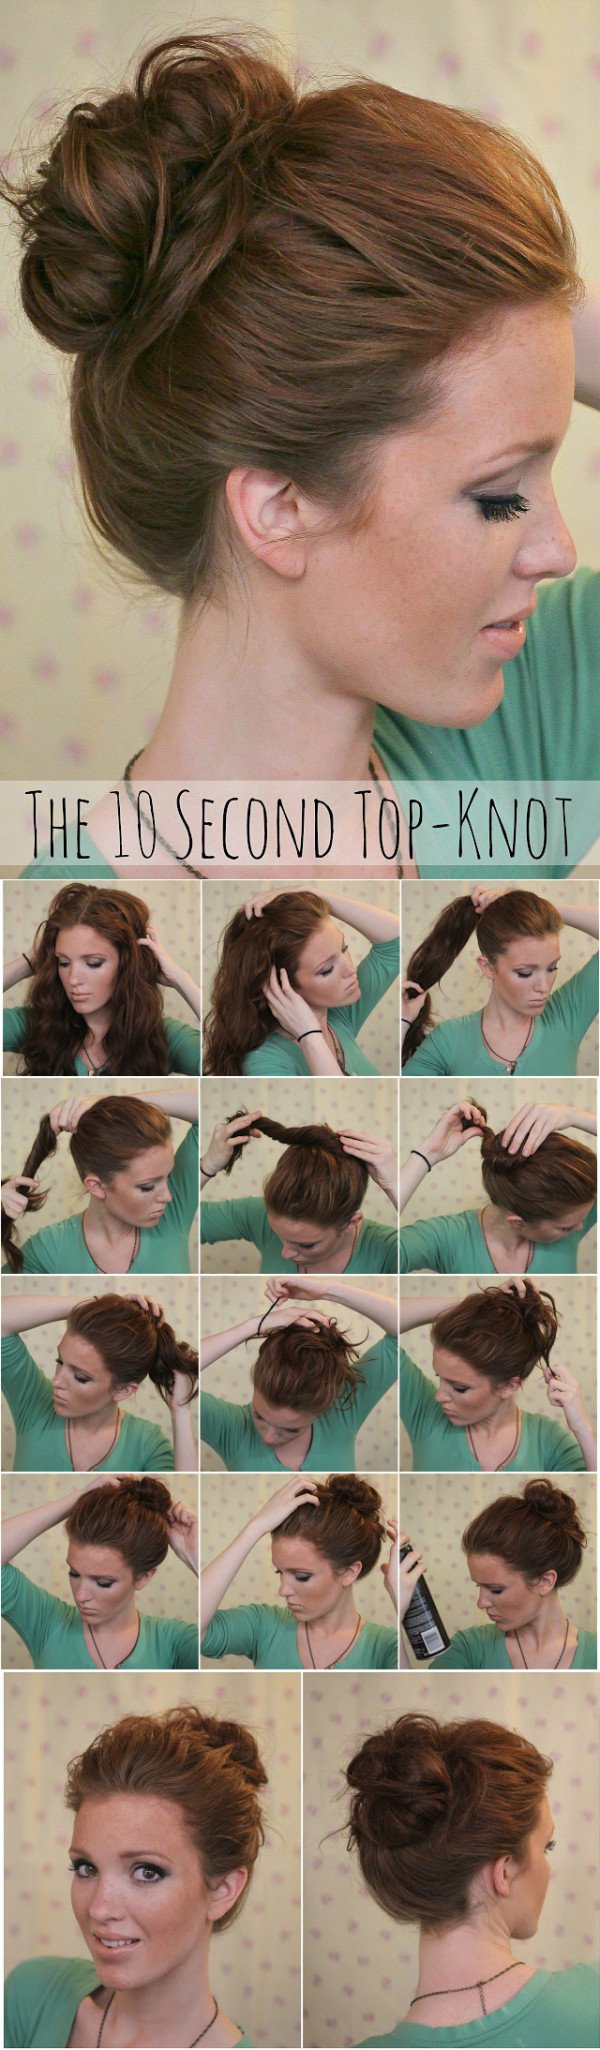 17 Easy DIY Tutorials For Glamorous and Cute Hairstyle